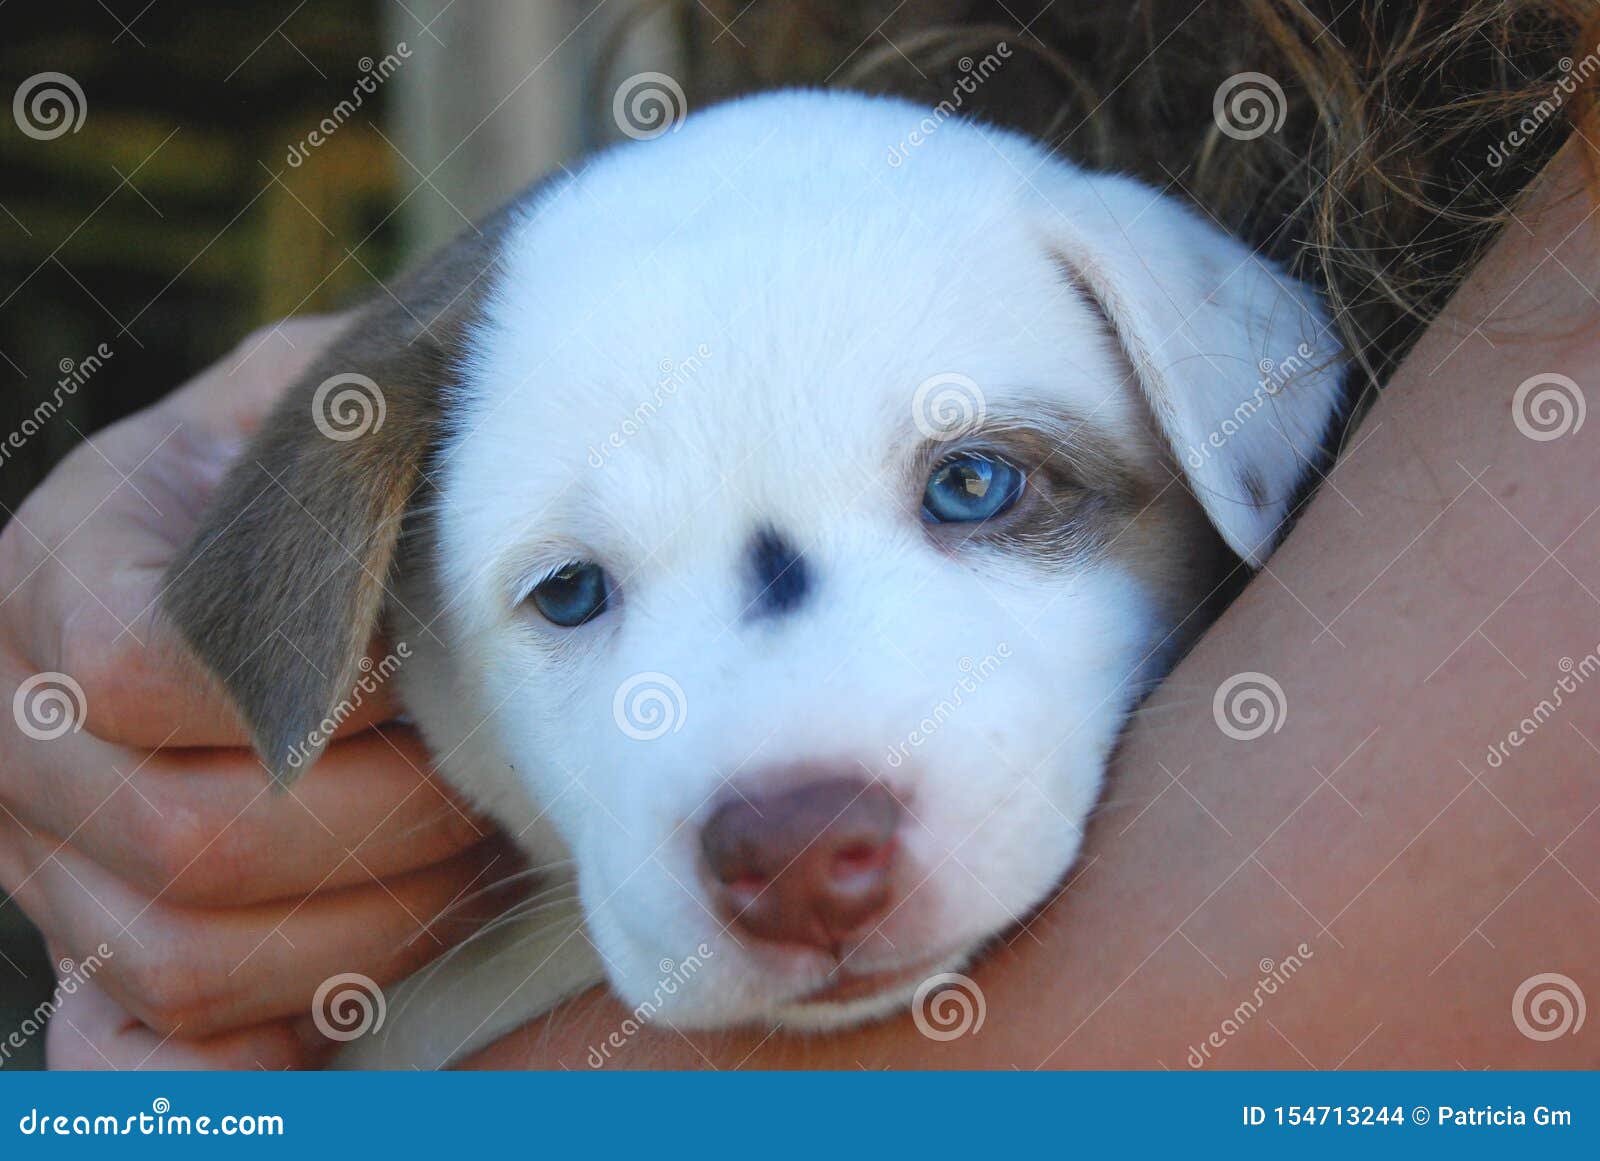 Portrait of a Cute Brown and White Baby Dog Puppy Whit Blue Eyes ...